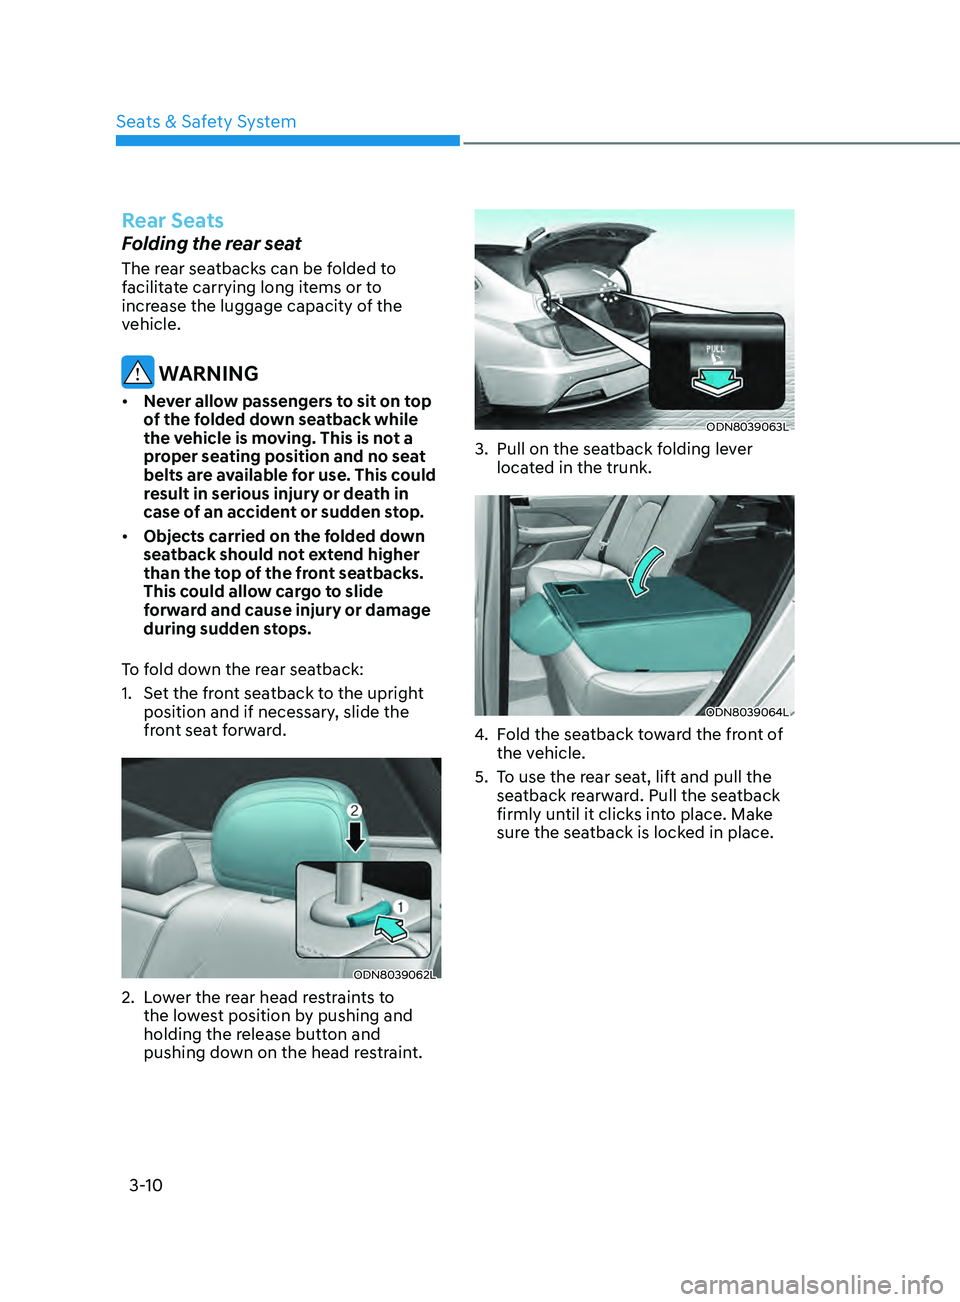 HYUNDAI SONATA 2022  Owners Manual 3-10
Rear Seats
Folding the rear seat
The rear seatbacks can be folded to 
facilitate carrying long items or to 
increase the luggage capacity of the 
vehicle.
 WARNING
•	Never allow passengers to s